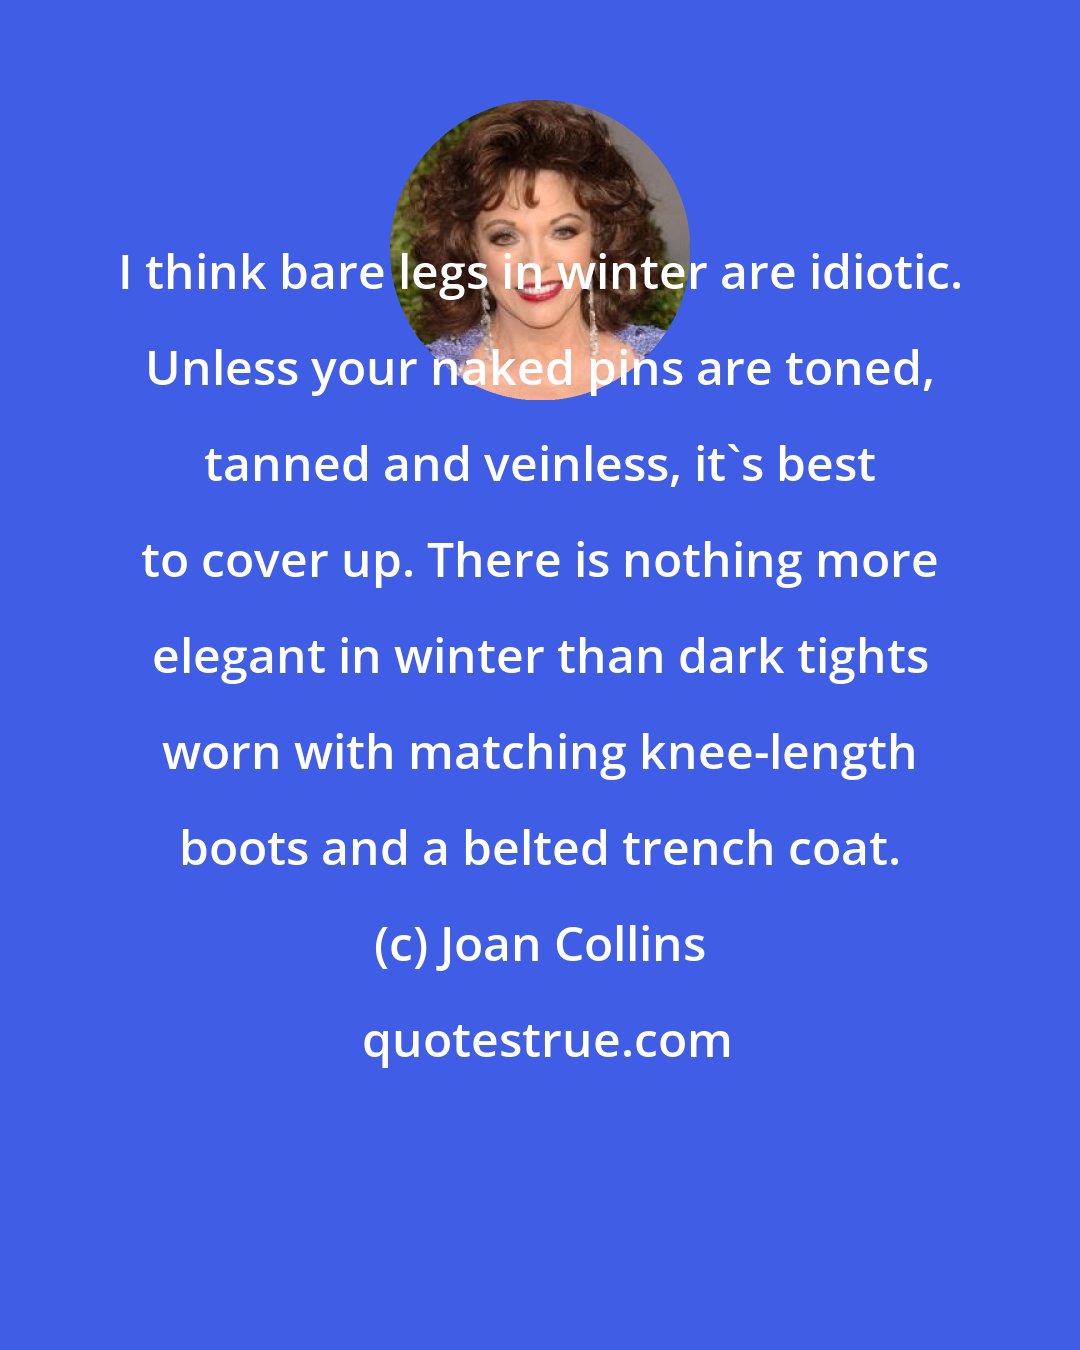 Joan Collins: I think bare legs in winter are idiotic. Unless your naked pins are toned, tanned and veinless, it's best to cover up. There is nothing more elegant in winter than dark tights worn with matching knee-length boots and a belted trench coat.